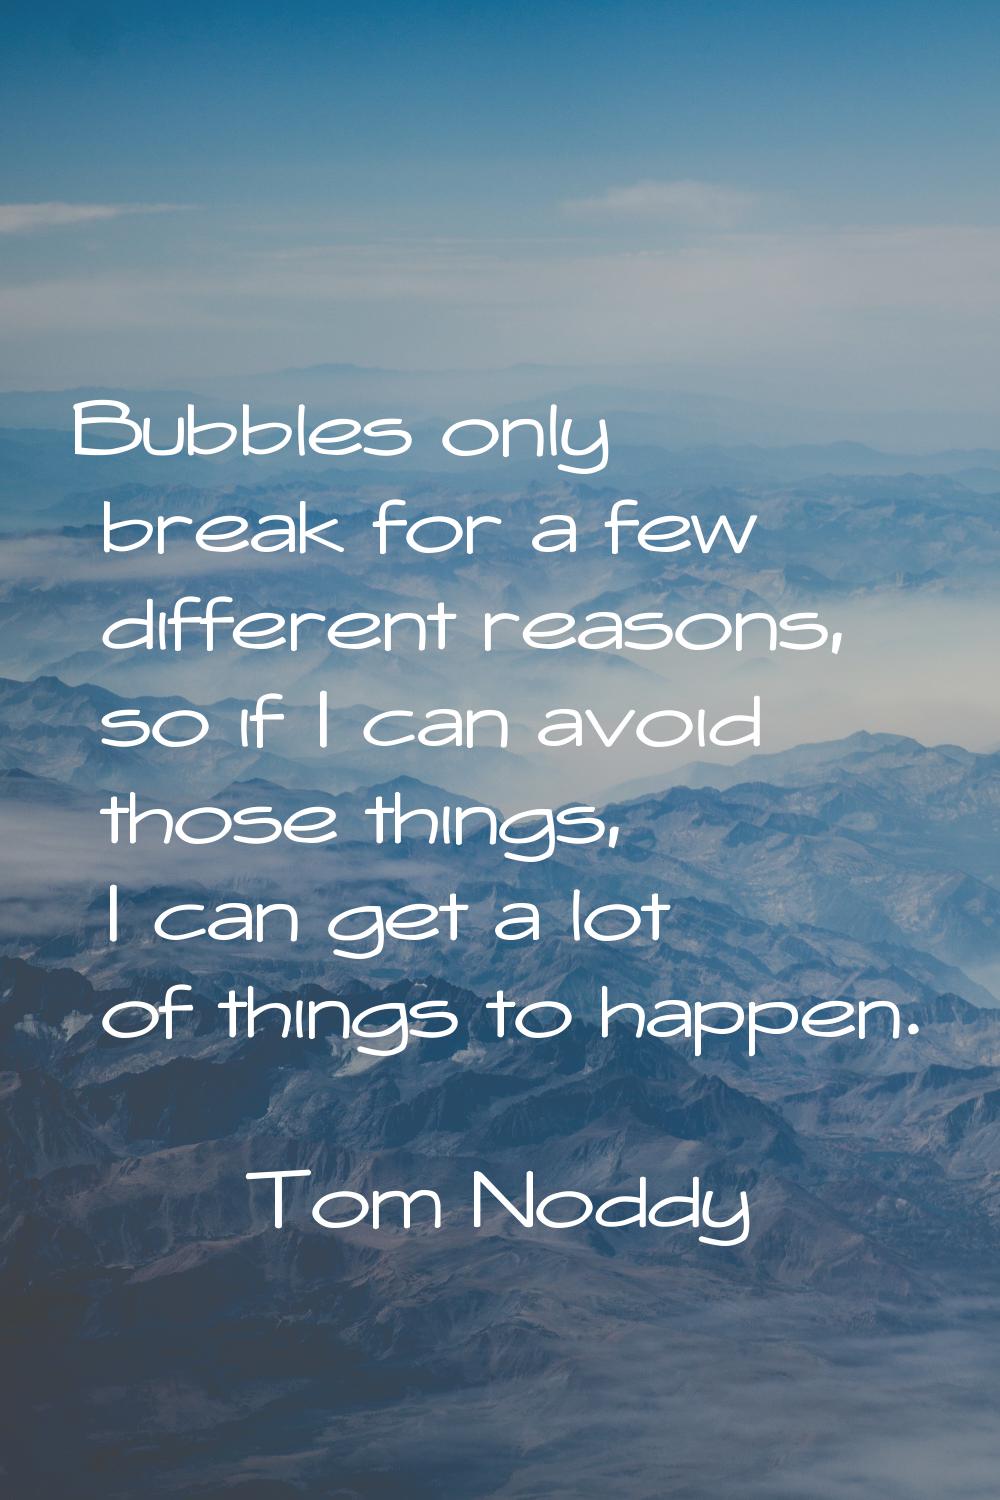 Bubbles only break for a few different reasons, so if I can avoid those things, I can get a lot of 